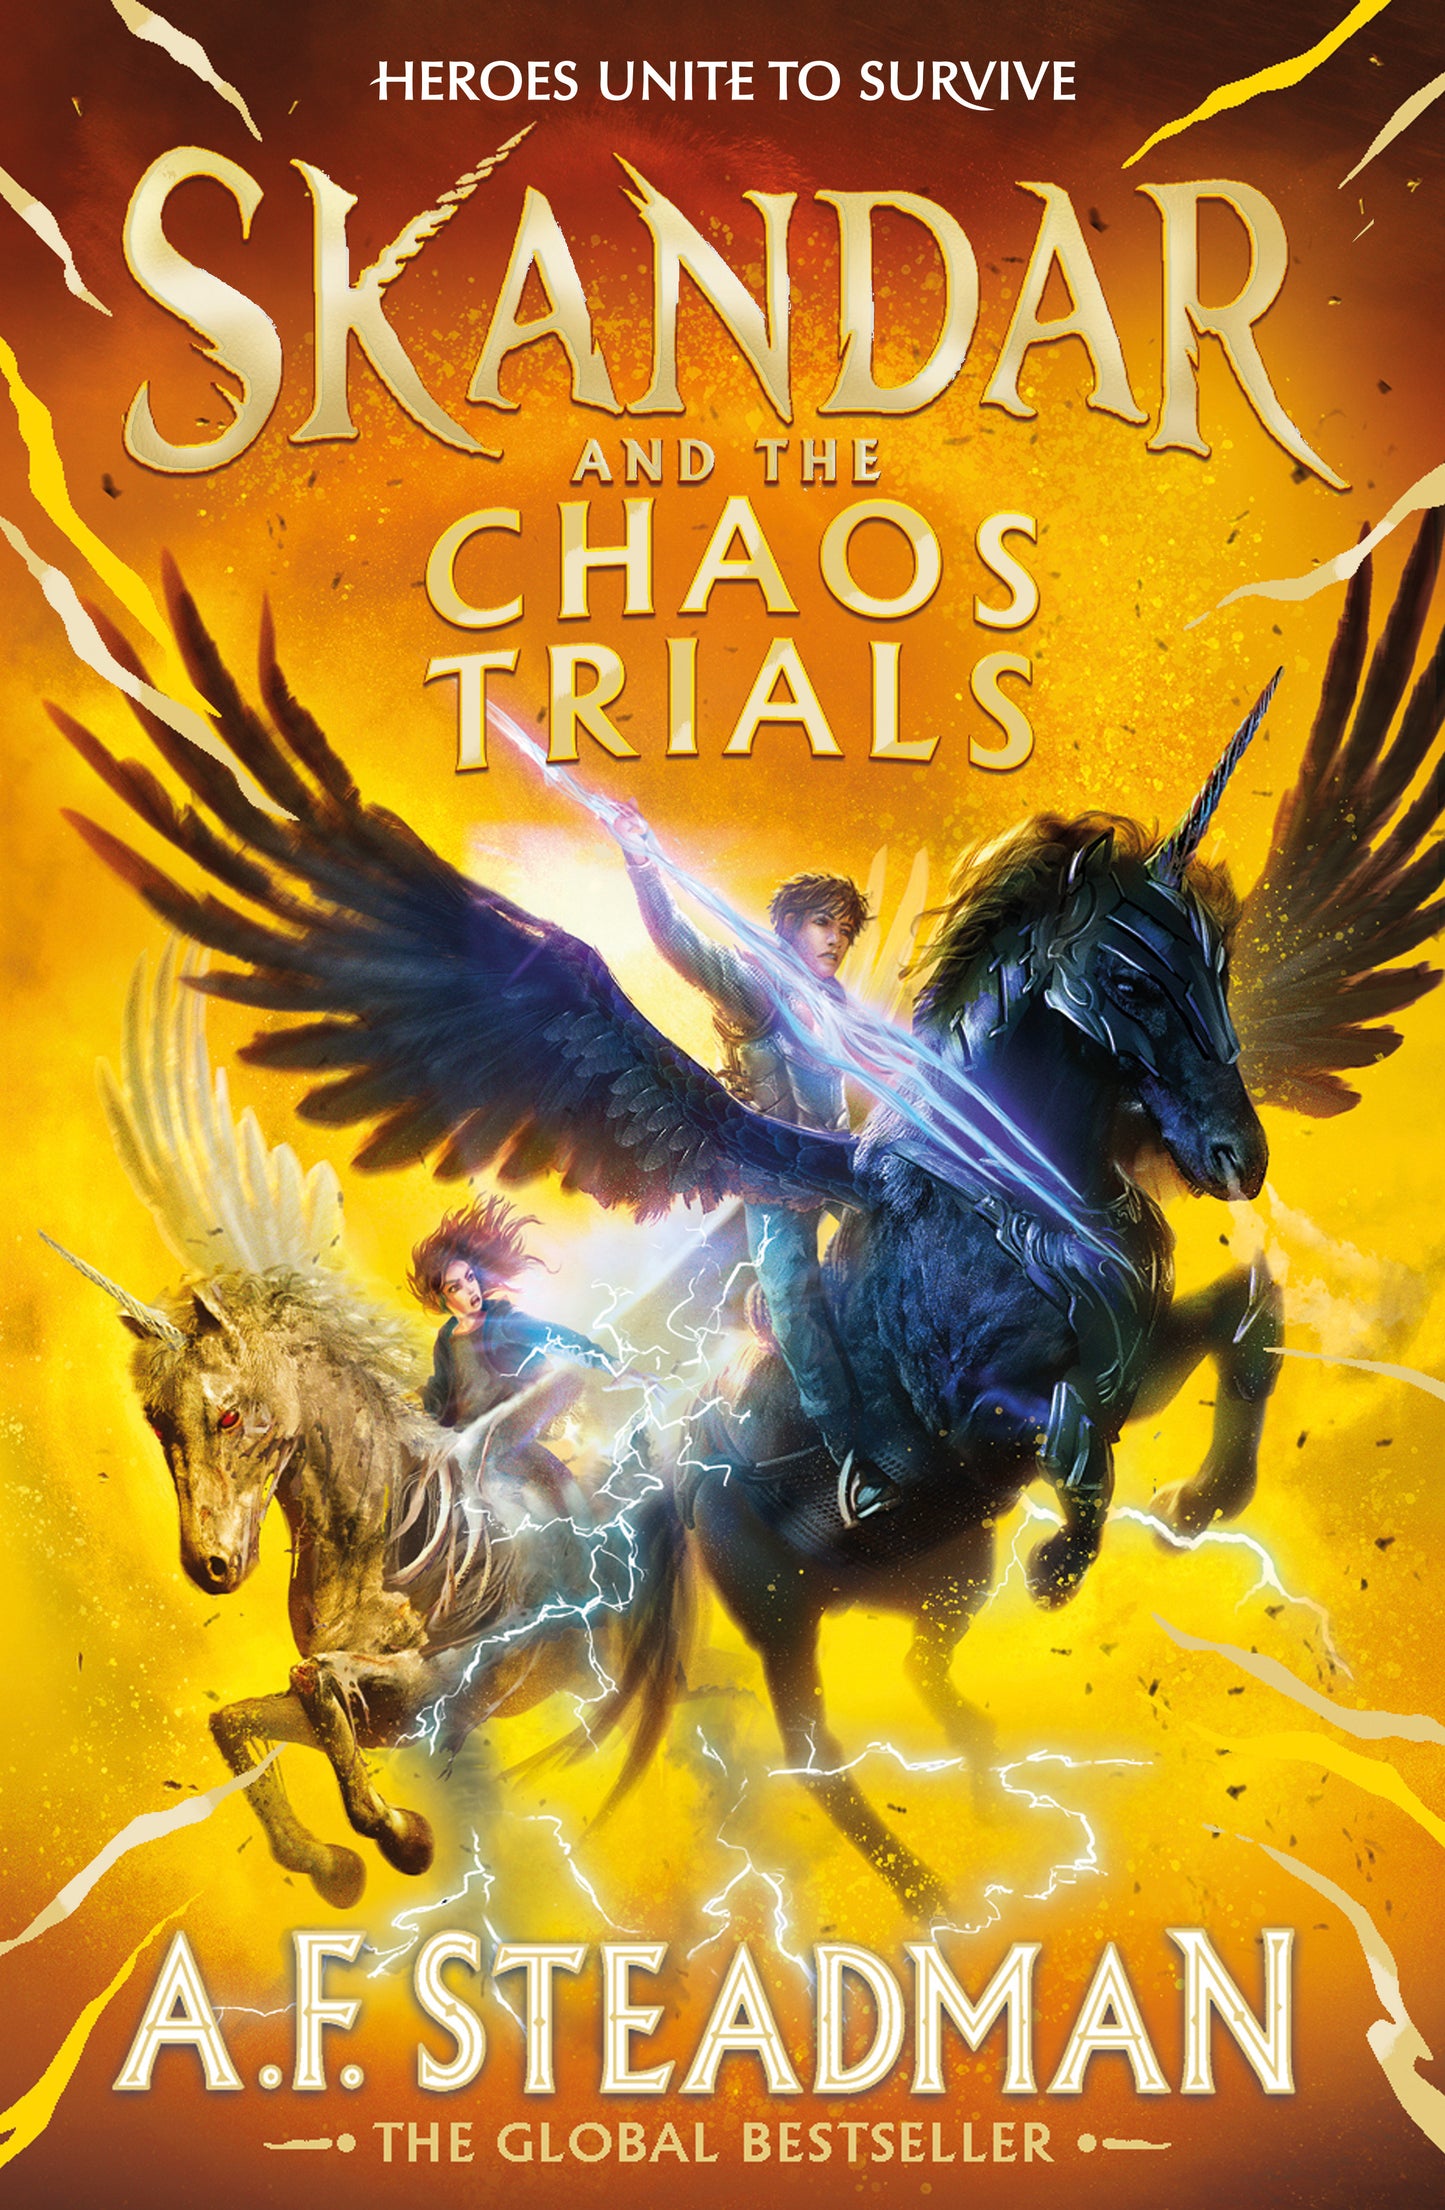 PRE-ORDER Skandar and the Chaos Trials INDIE EXCLUSIVE - A. F. Steadman